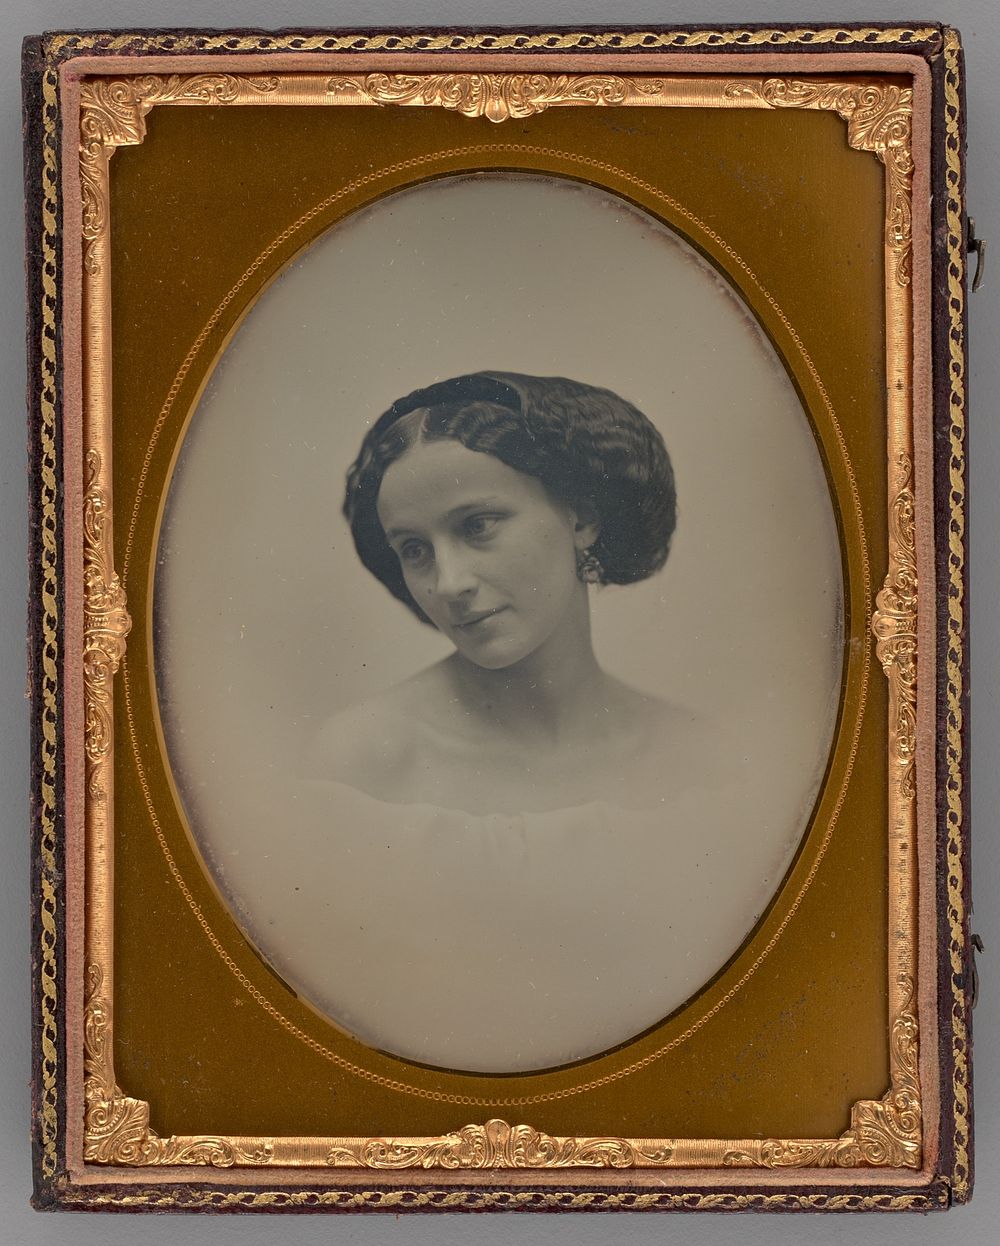 Untitled (Portrait of a Woman) by Southworth & Hawes